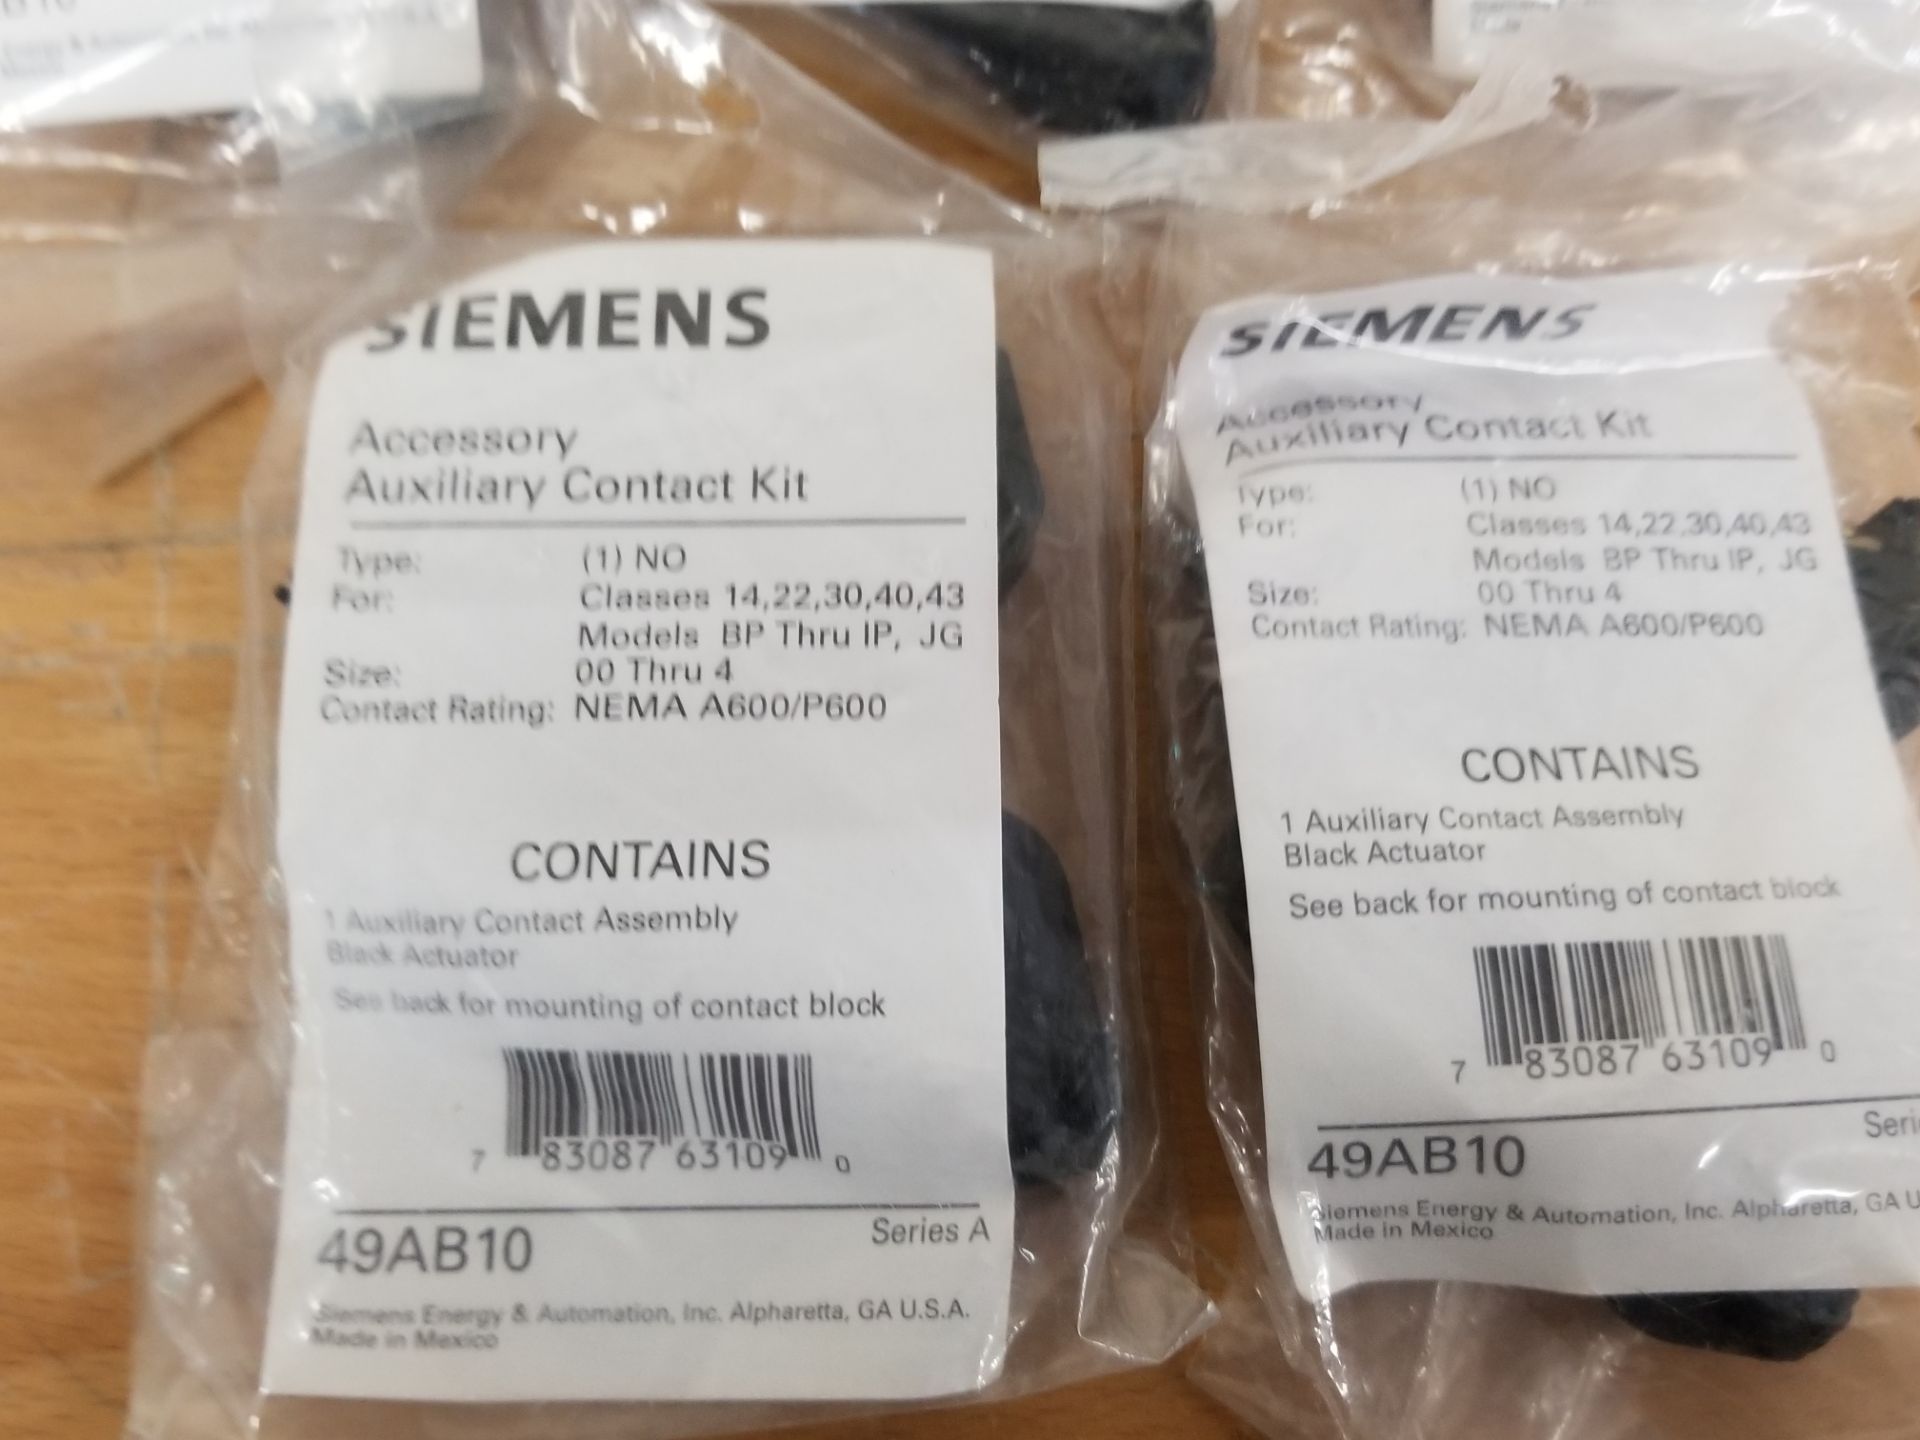 LOT OF NEW SIEMENS AUXILIARY CONTACT BLOCK KITS - Image 2 of 5